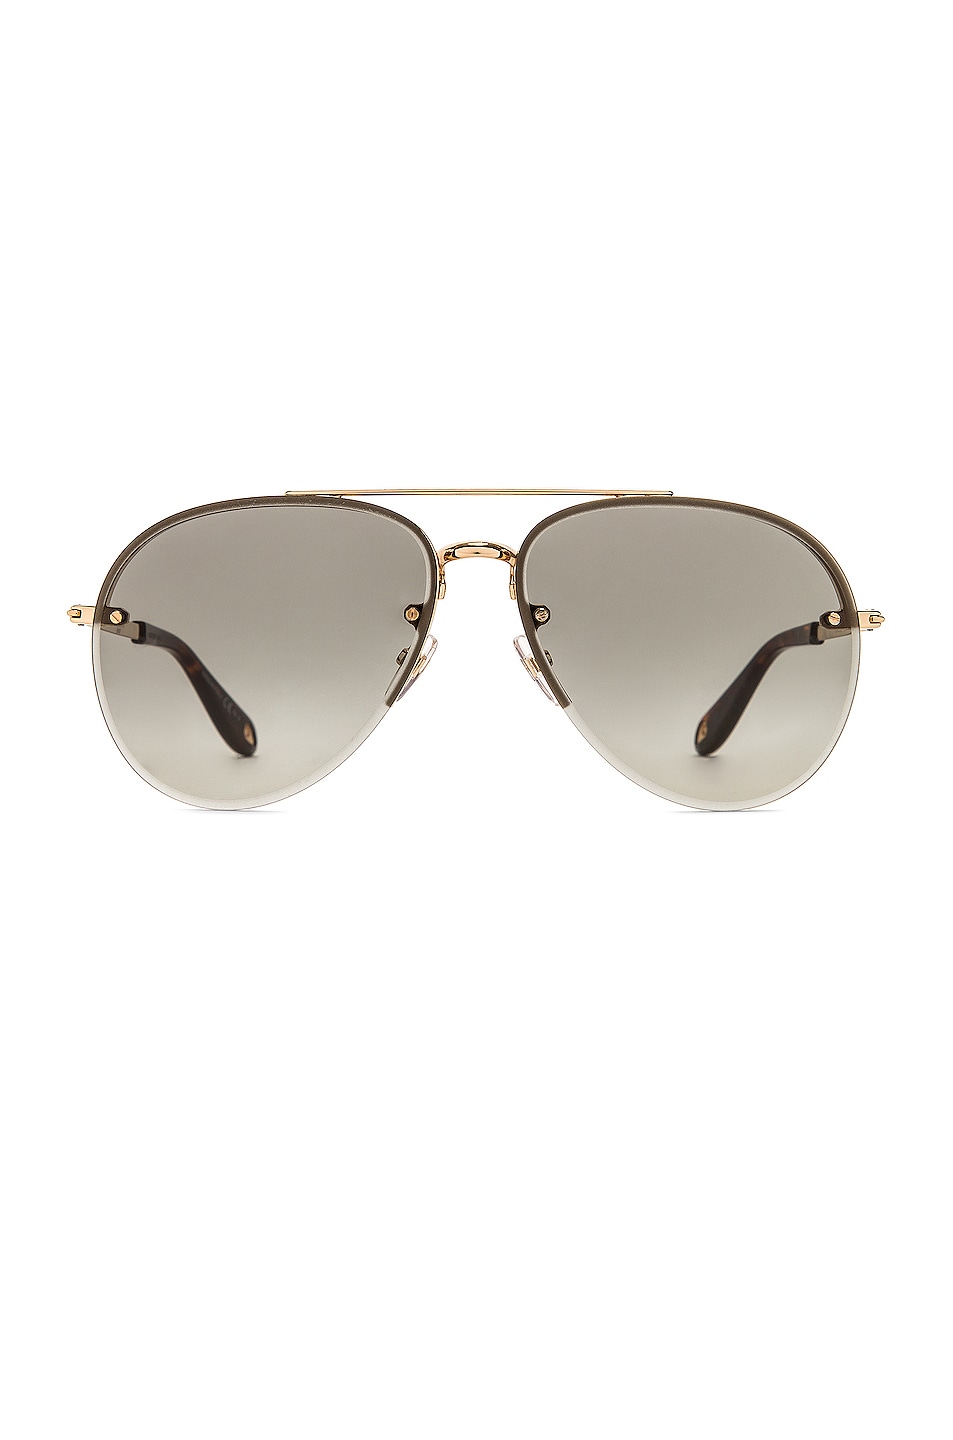 Image 1 of Givenchy Metal Aviator Sunglasses in Gold & Dark Grey Gradient